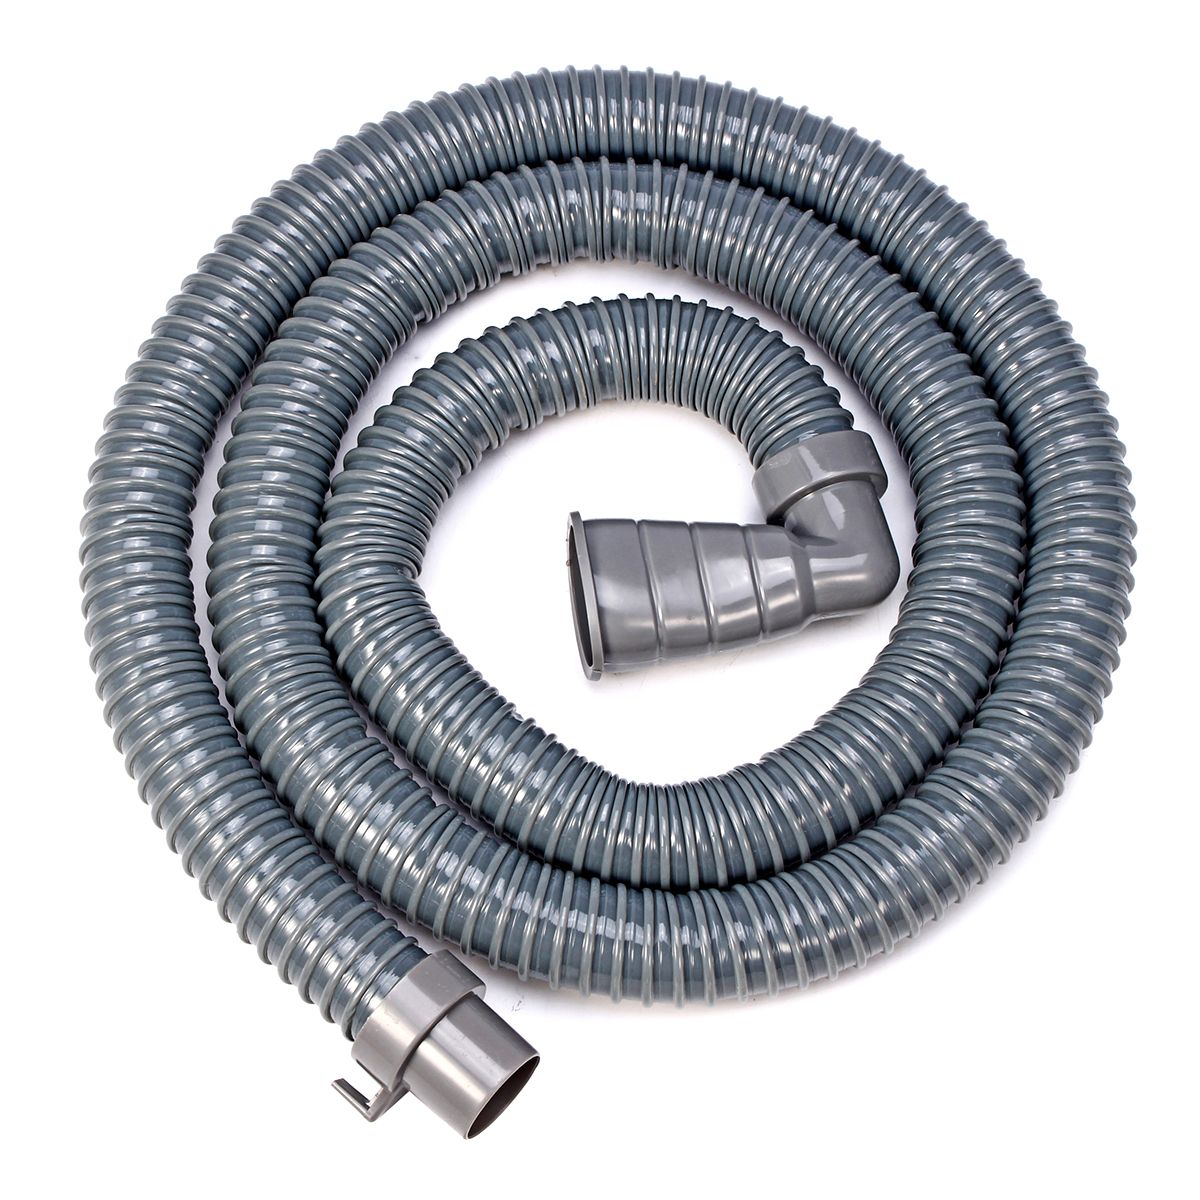 2345M-Universal-Extension-Washing-Machine-Drain-Water-Hose-Pipe-Connectors-1320398